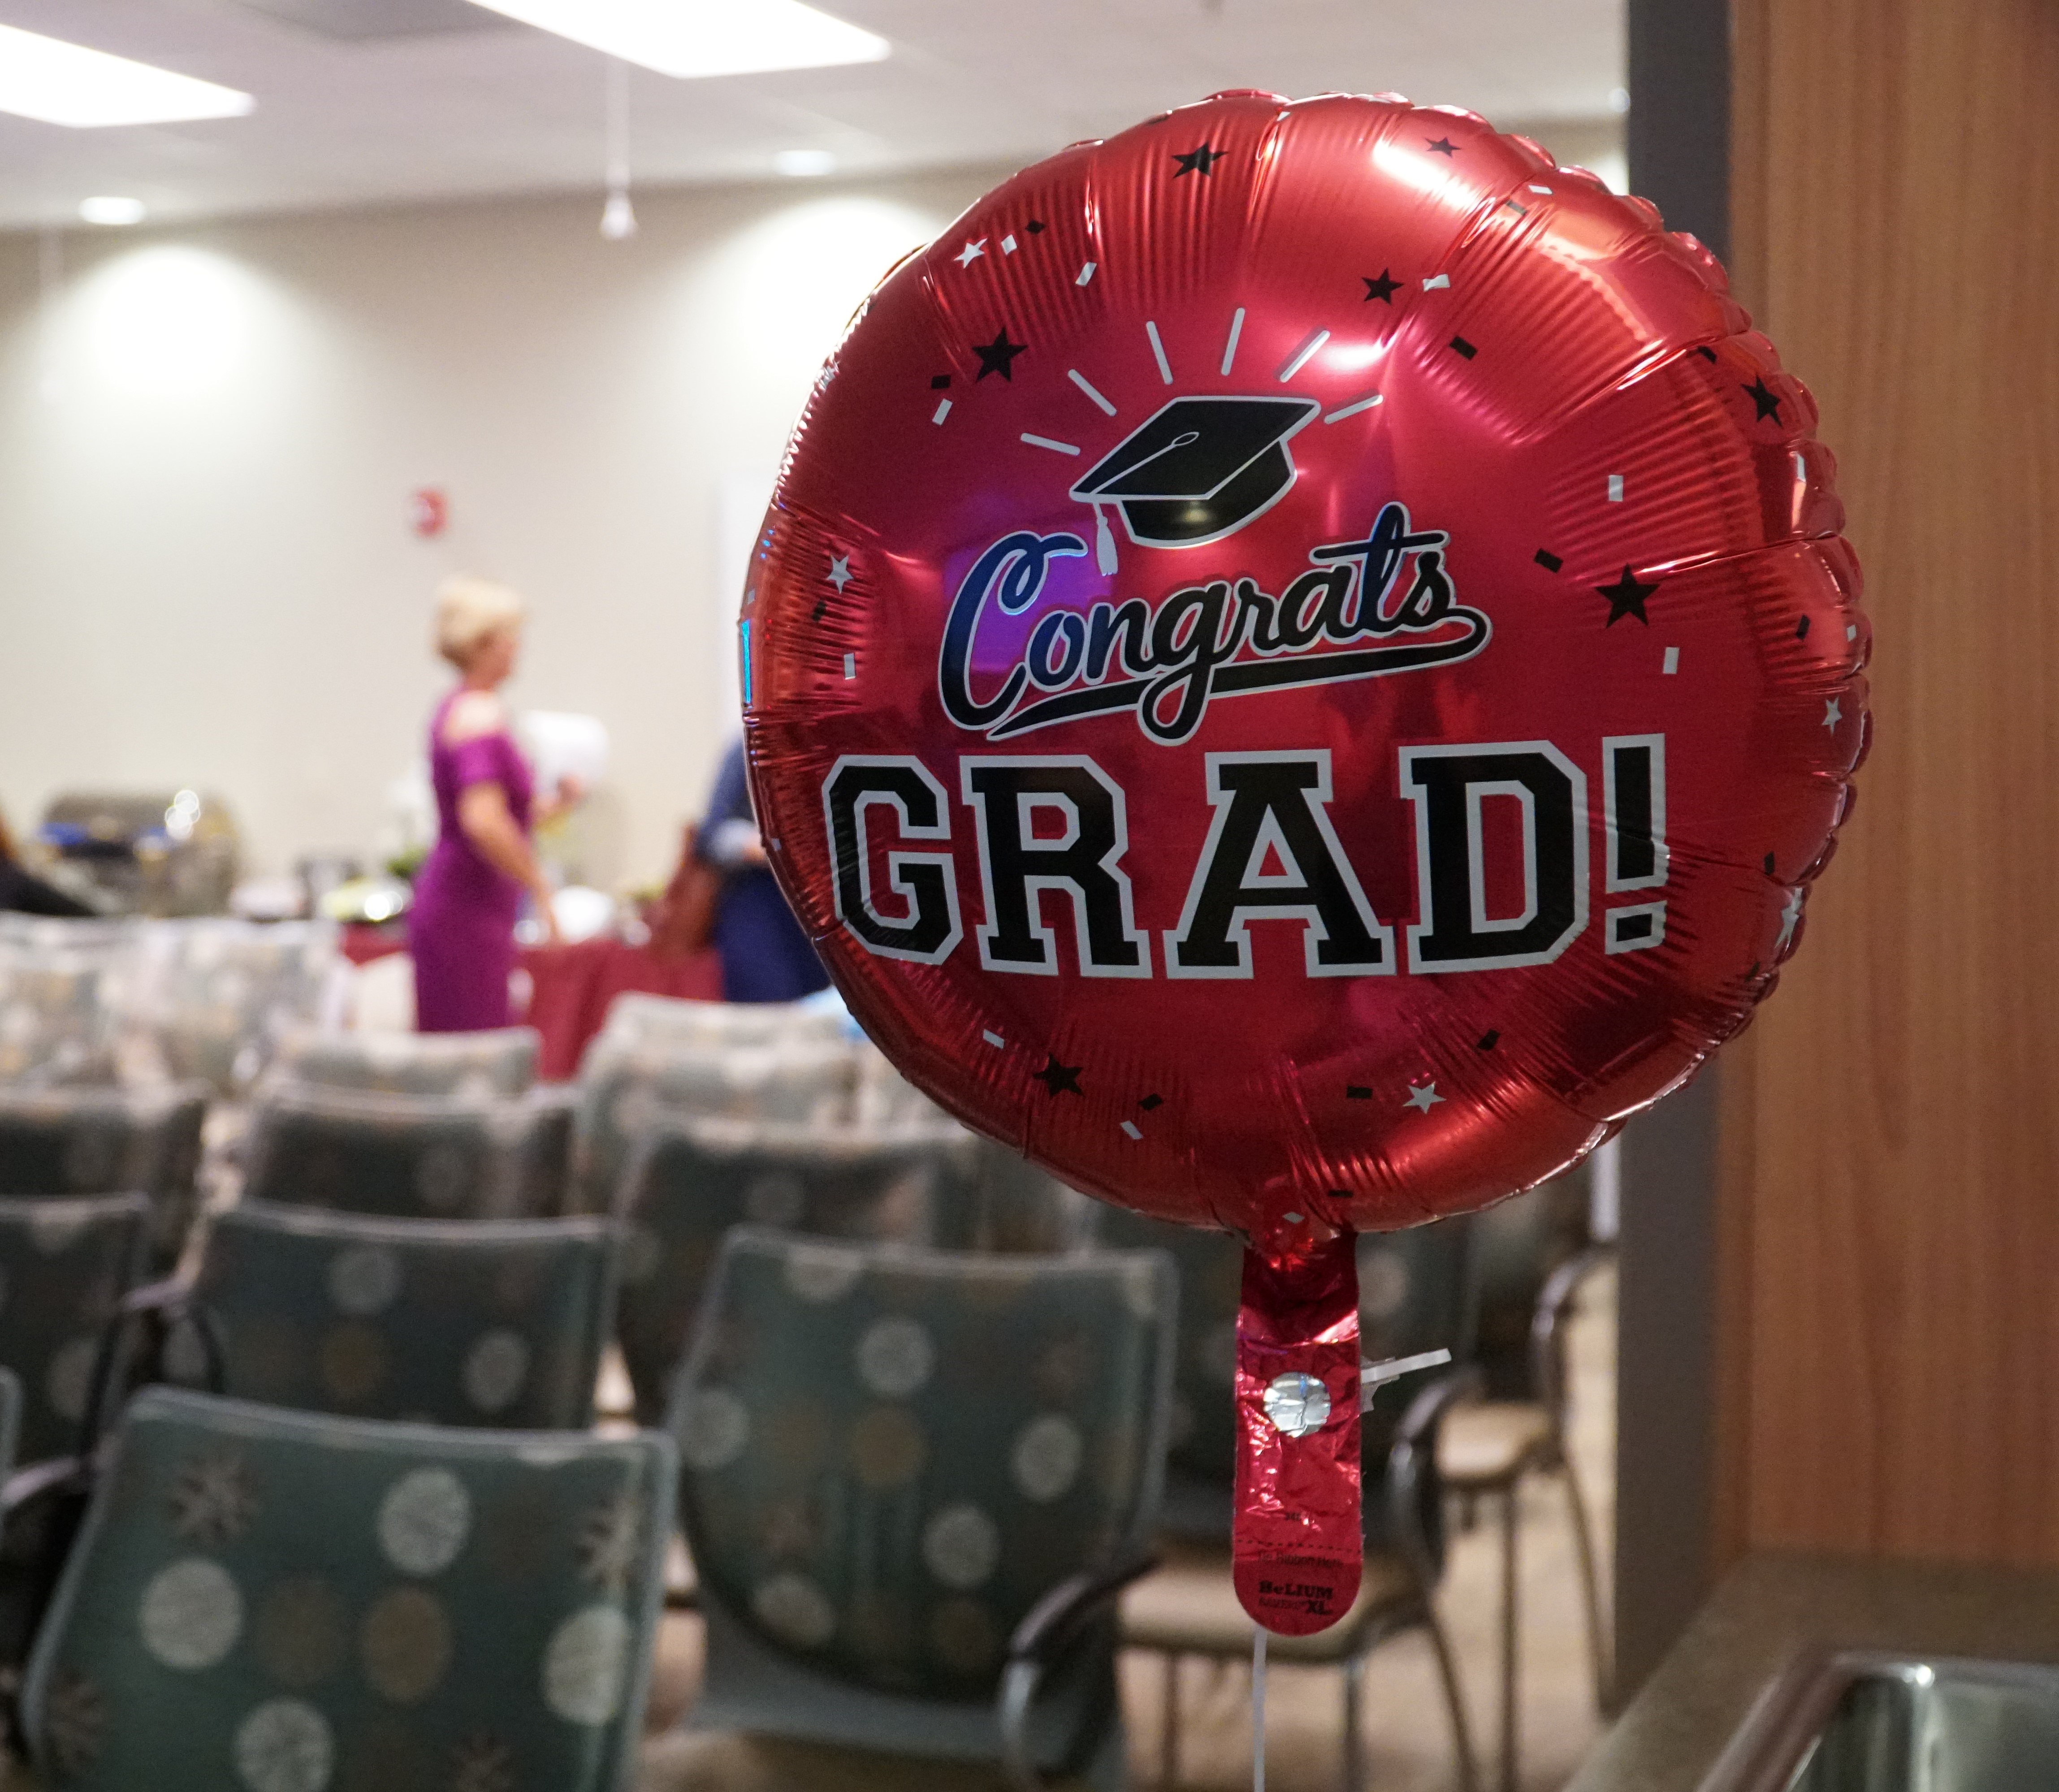 Project SEARCH balloon that says "Congrats Grad"